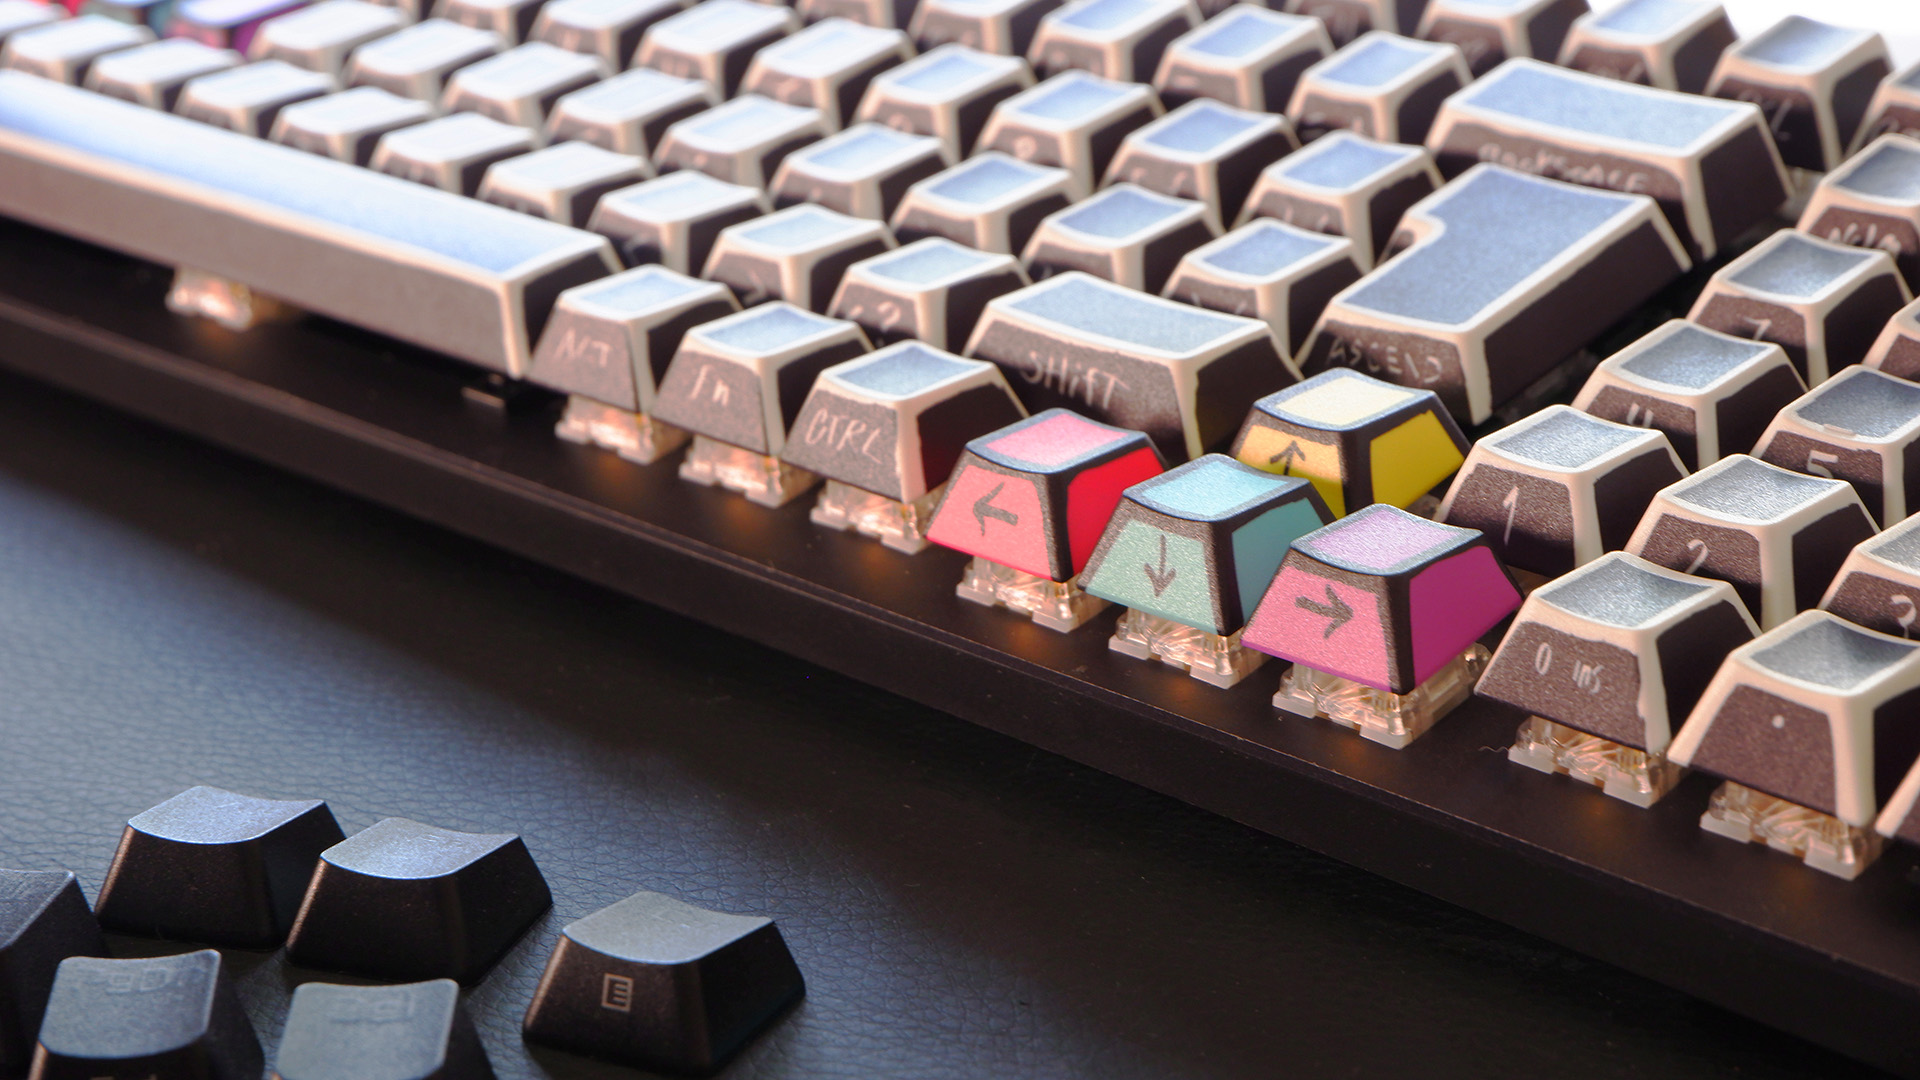 Keycap delivery! This limited edition keycap set from Glorious has turned my clean-cut keyboard into crude doodles and I'm surprisingly here for it